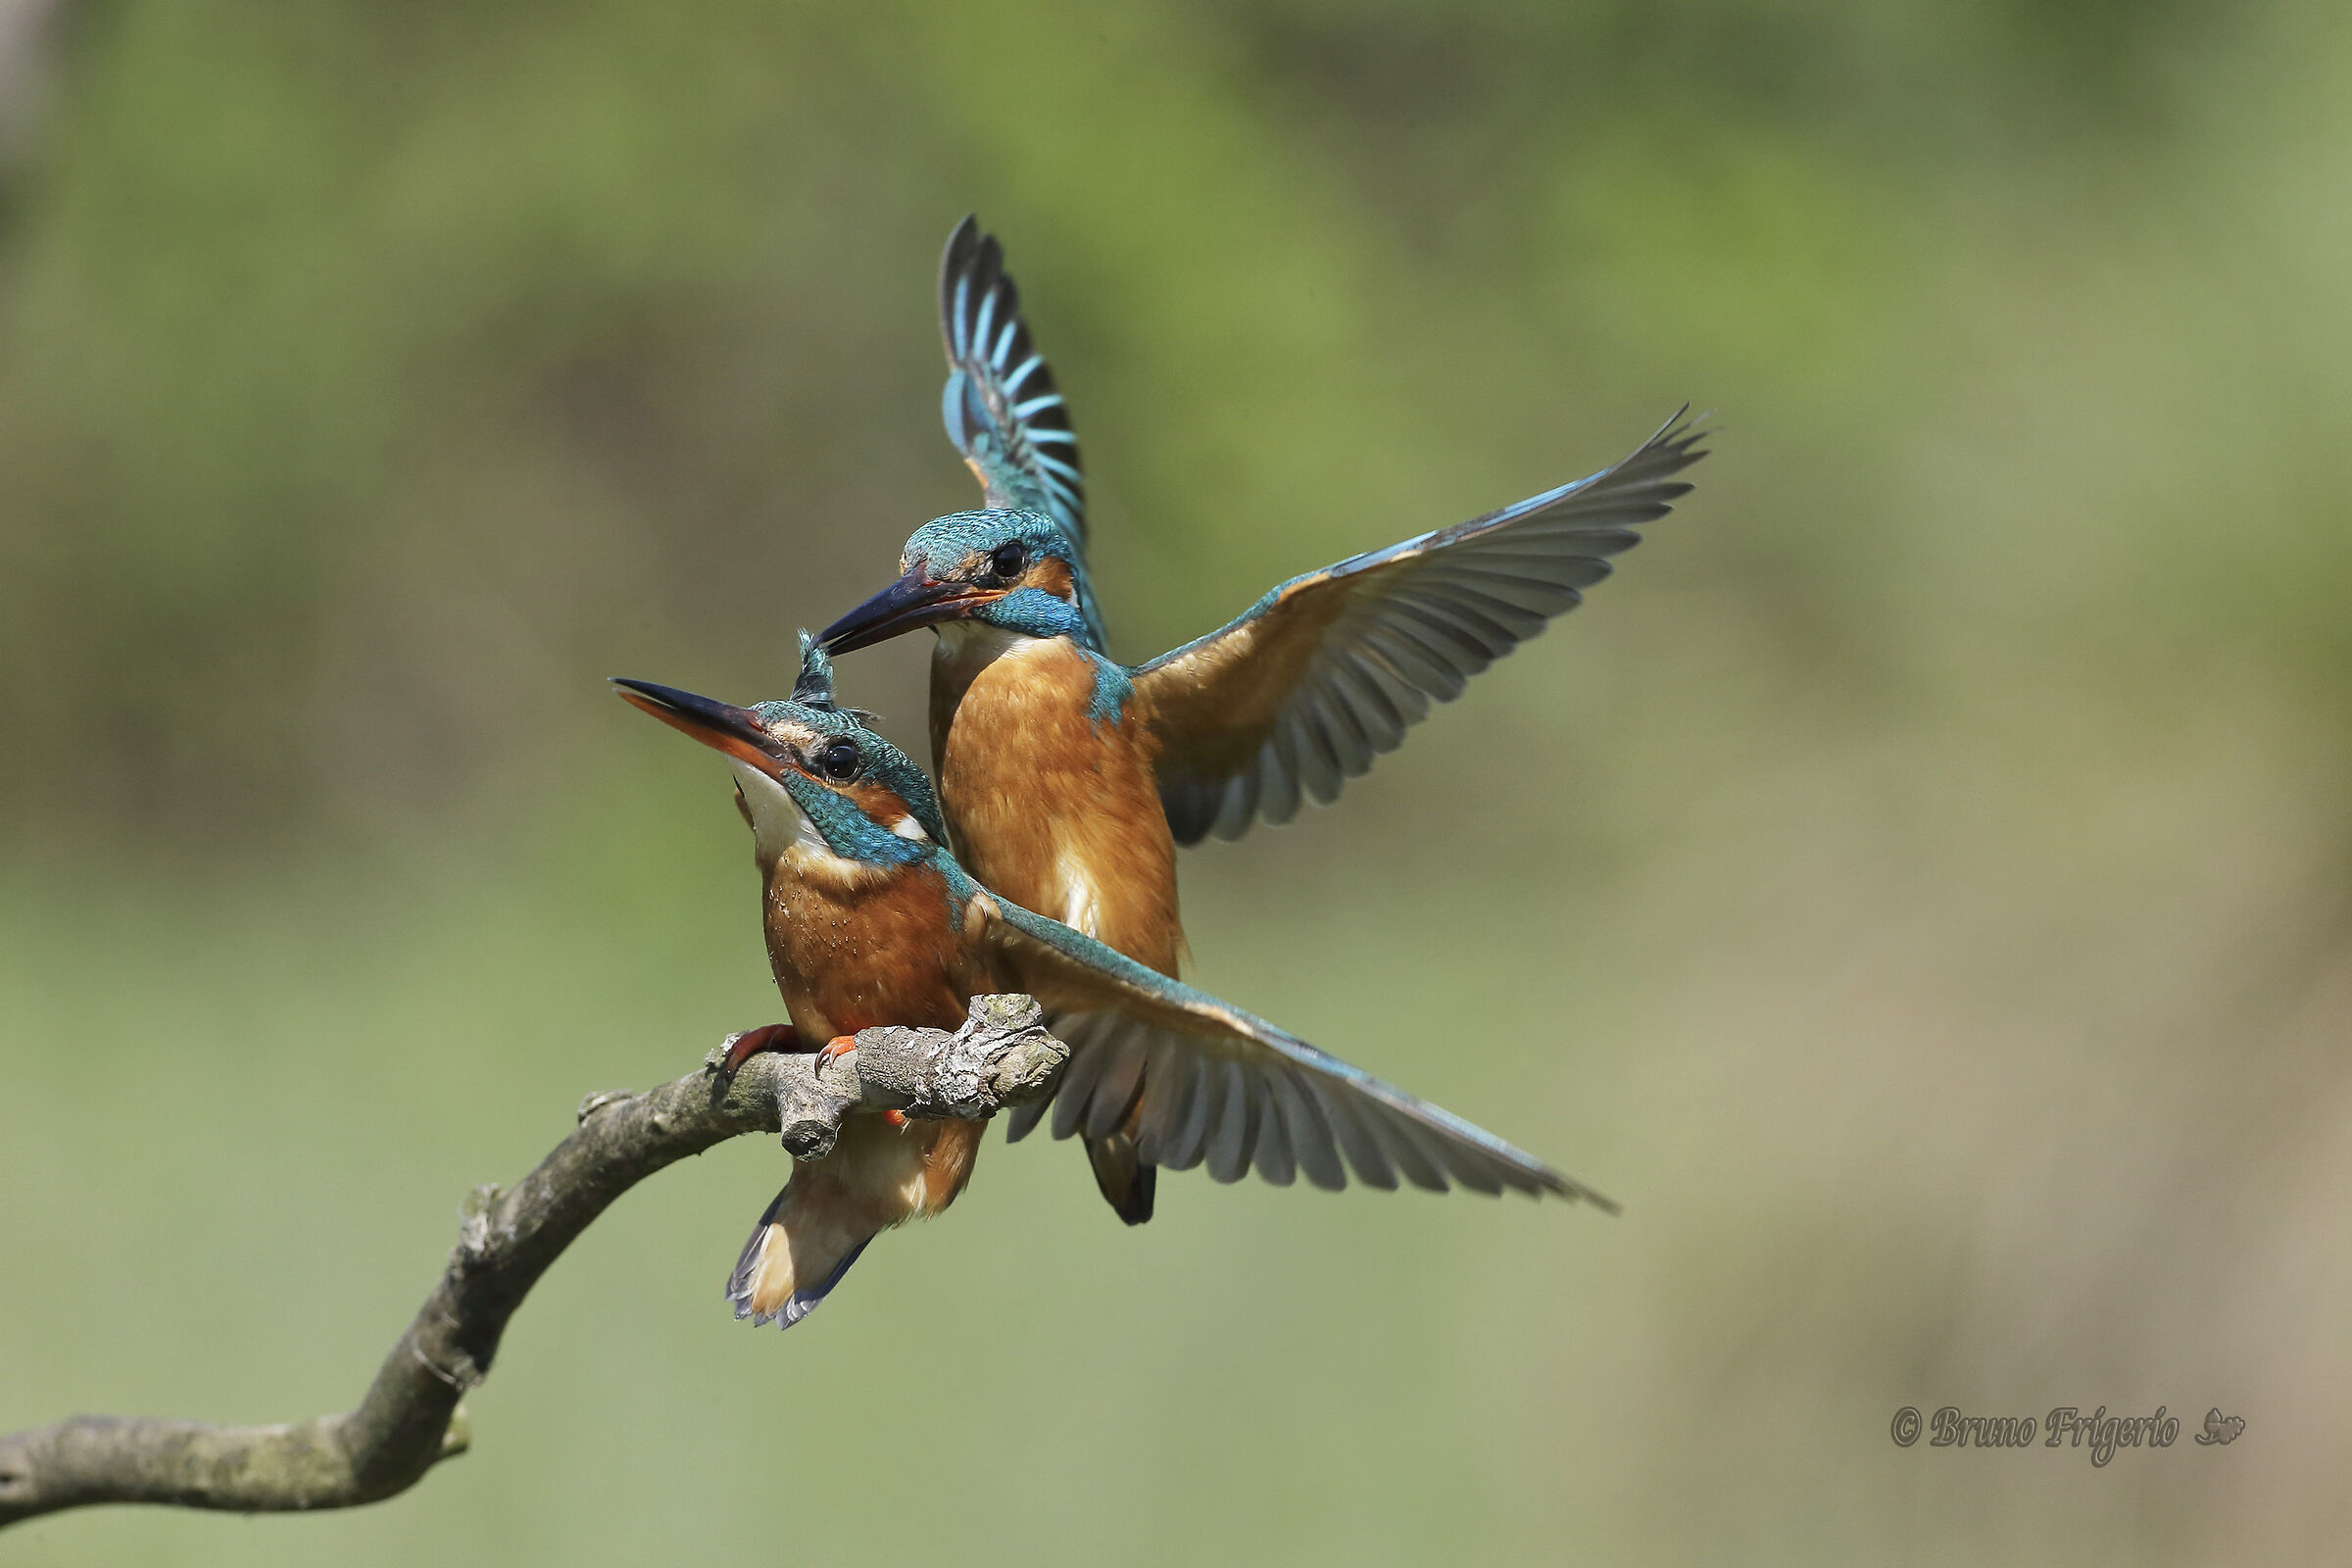 Kingfisher mating attempt...